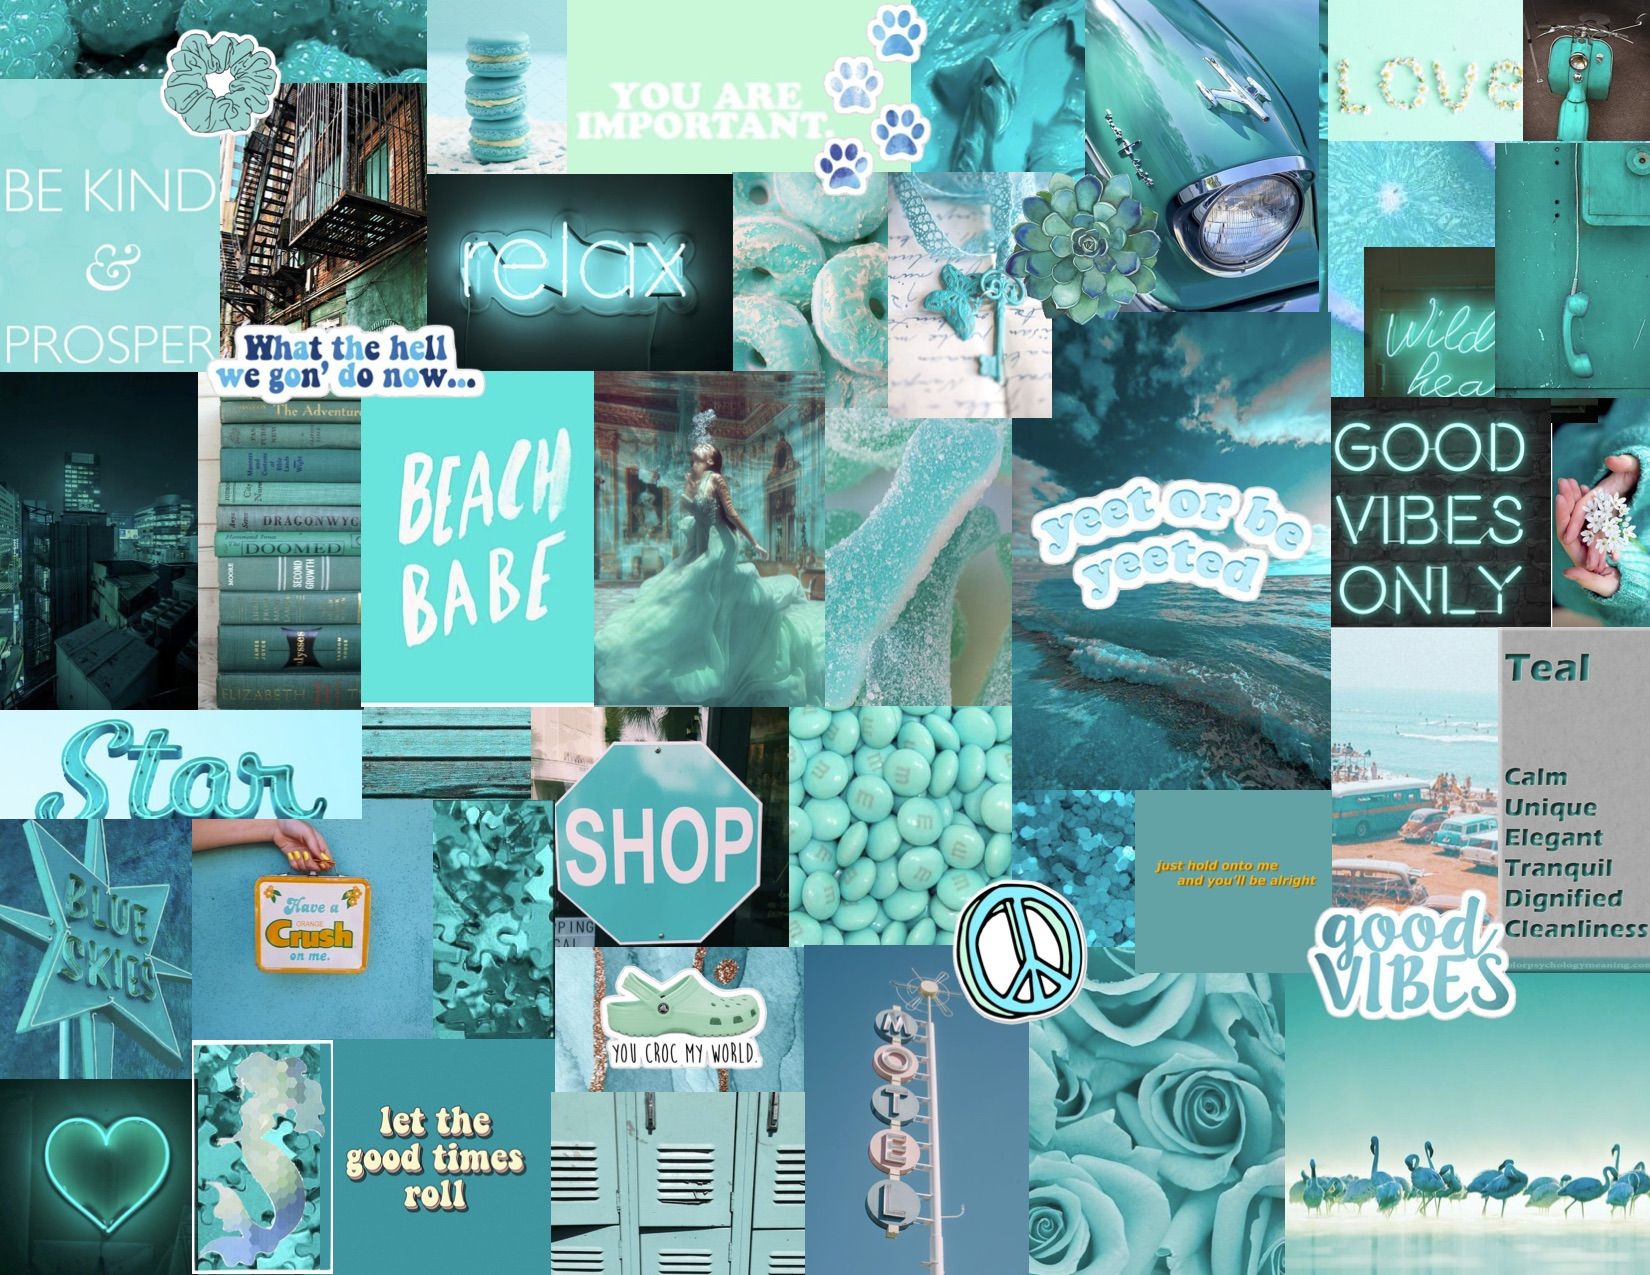 Girly Teal Wallpapers on WallpaperDog